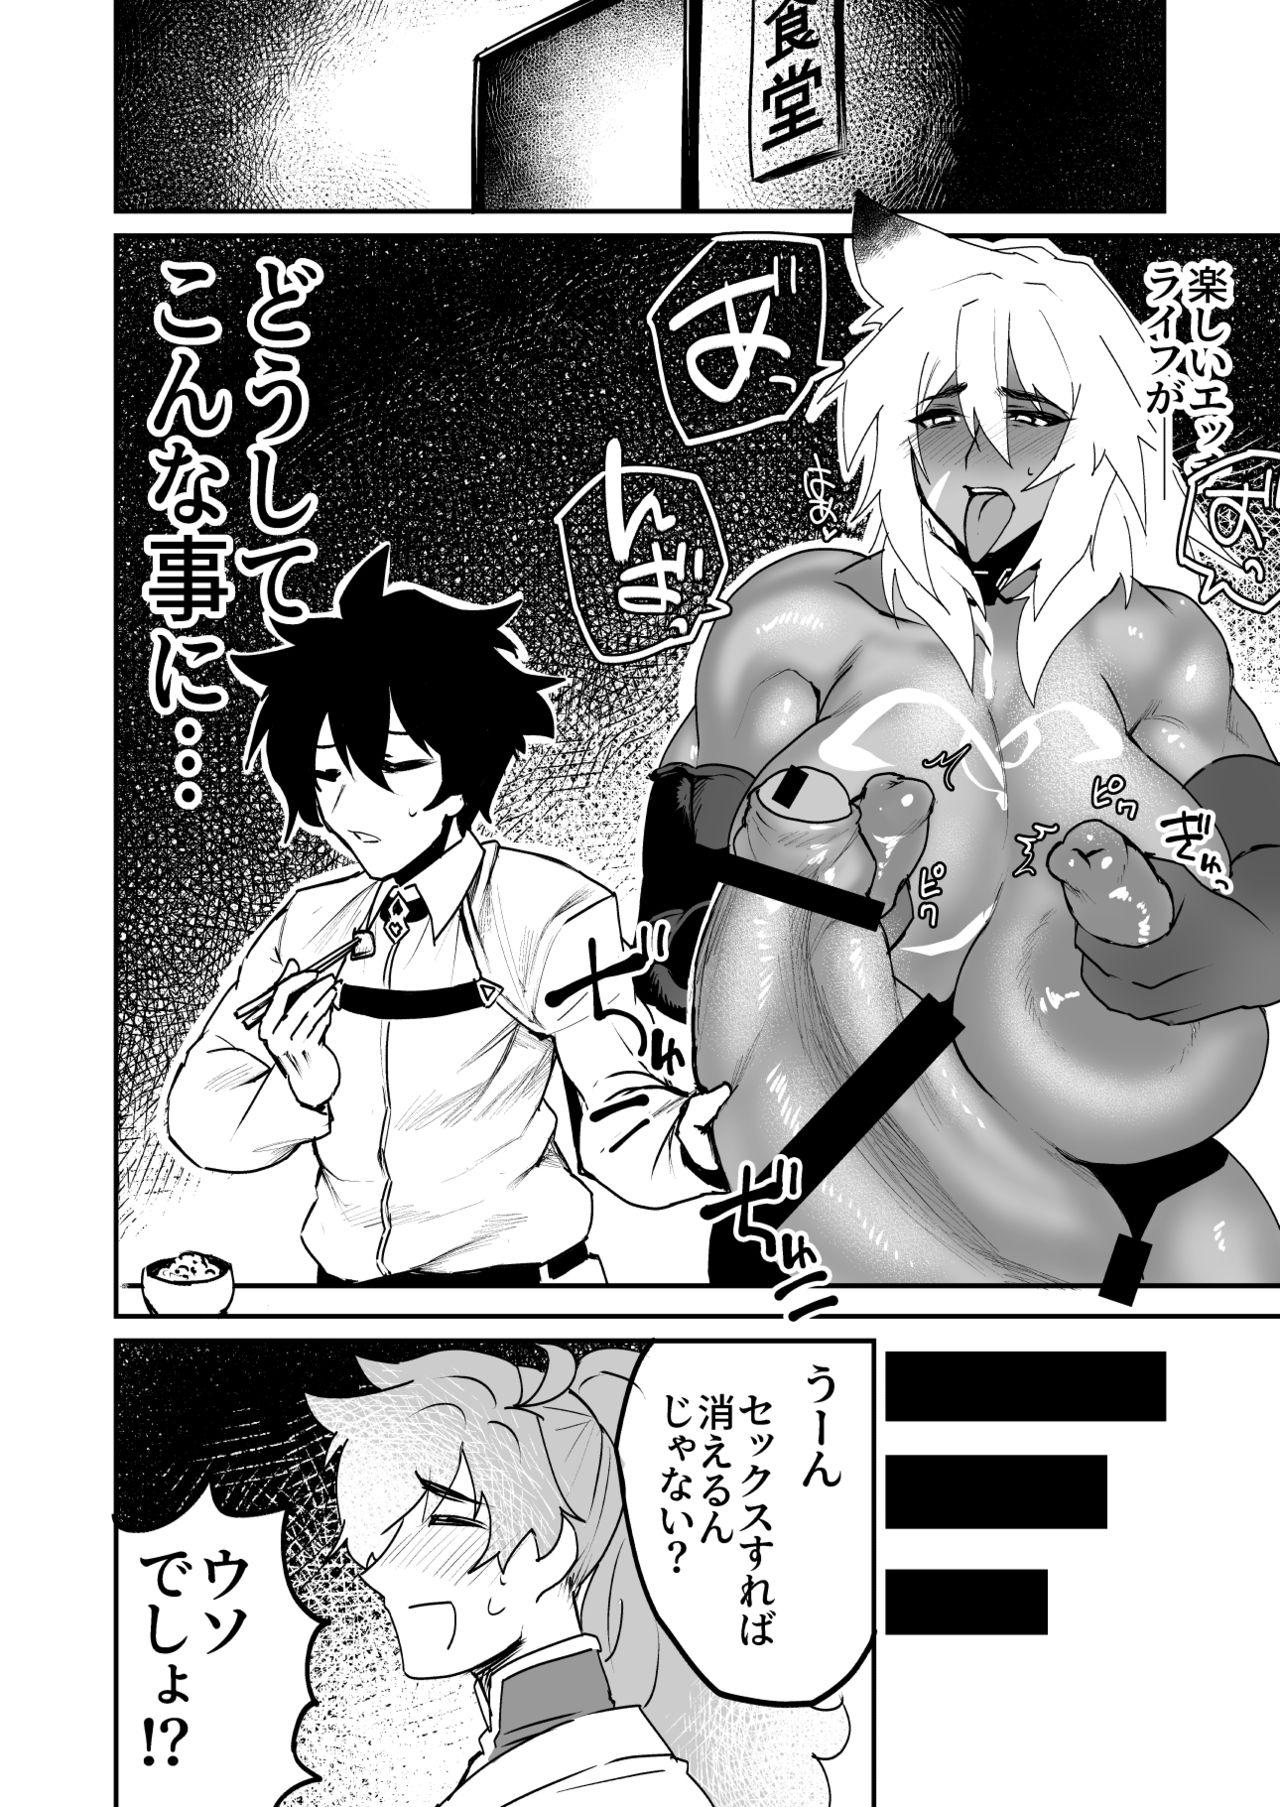 Pendeja Fall of the Illusory Big Titted Male Vagina - Fate grand order Negra - Page 9